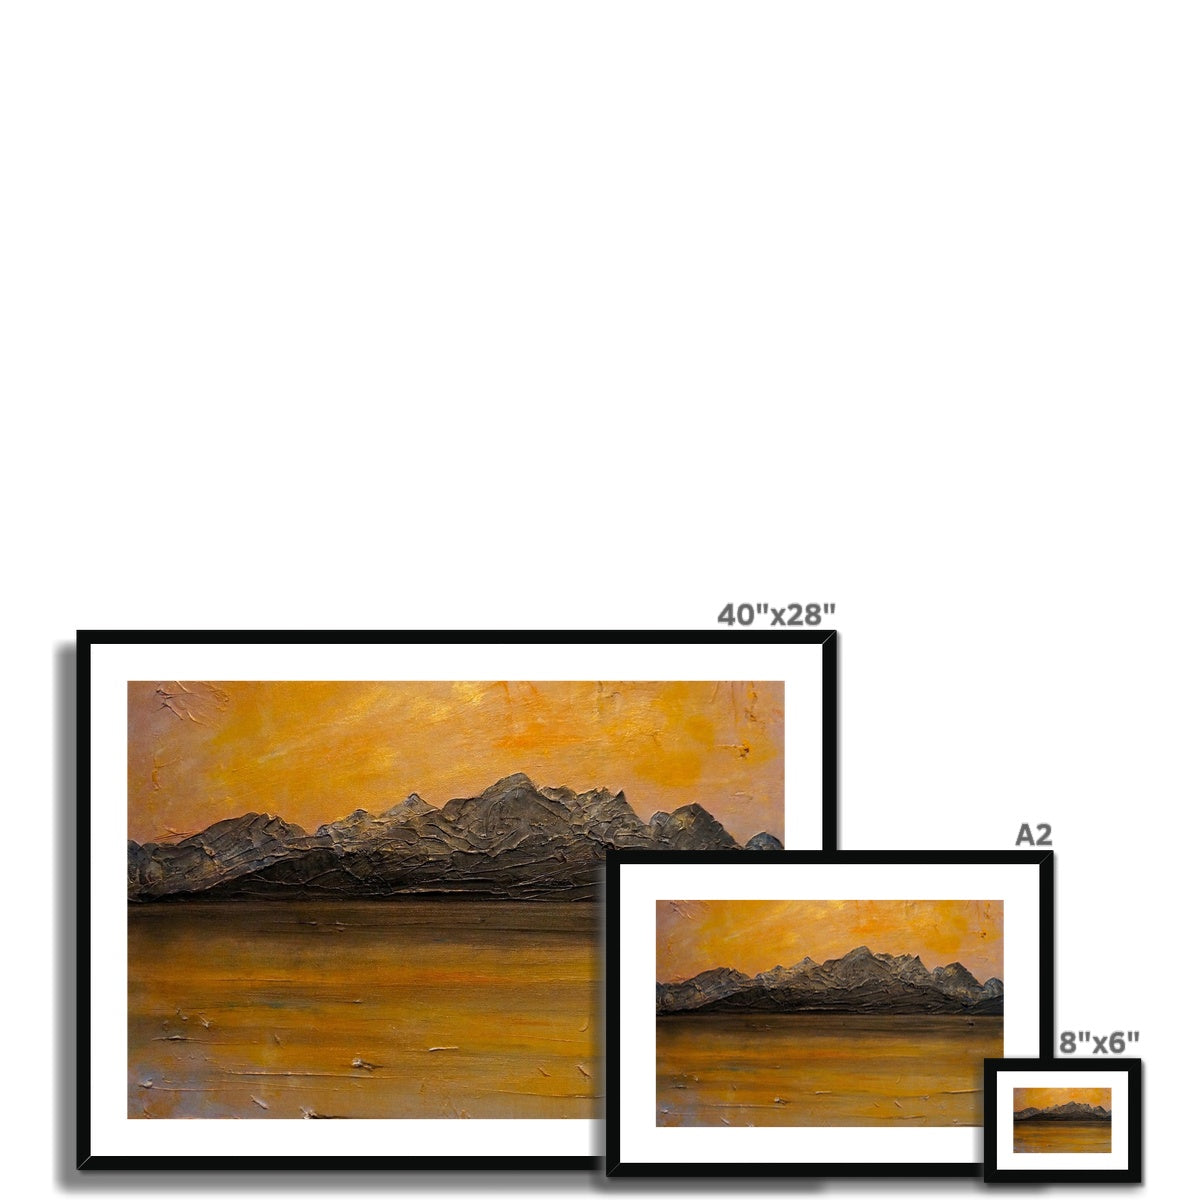 Cuillin Sunset Skye Painting | Framed & Mounted Prints From Scotland-Framed & Mounted Prints-Skye Art Gallery-Paintings, Prints, Homeware, Art Gifts From Scotland By Scottish Artist Kevin Hunter